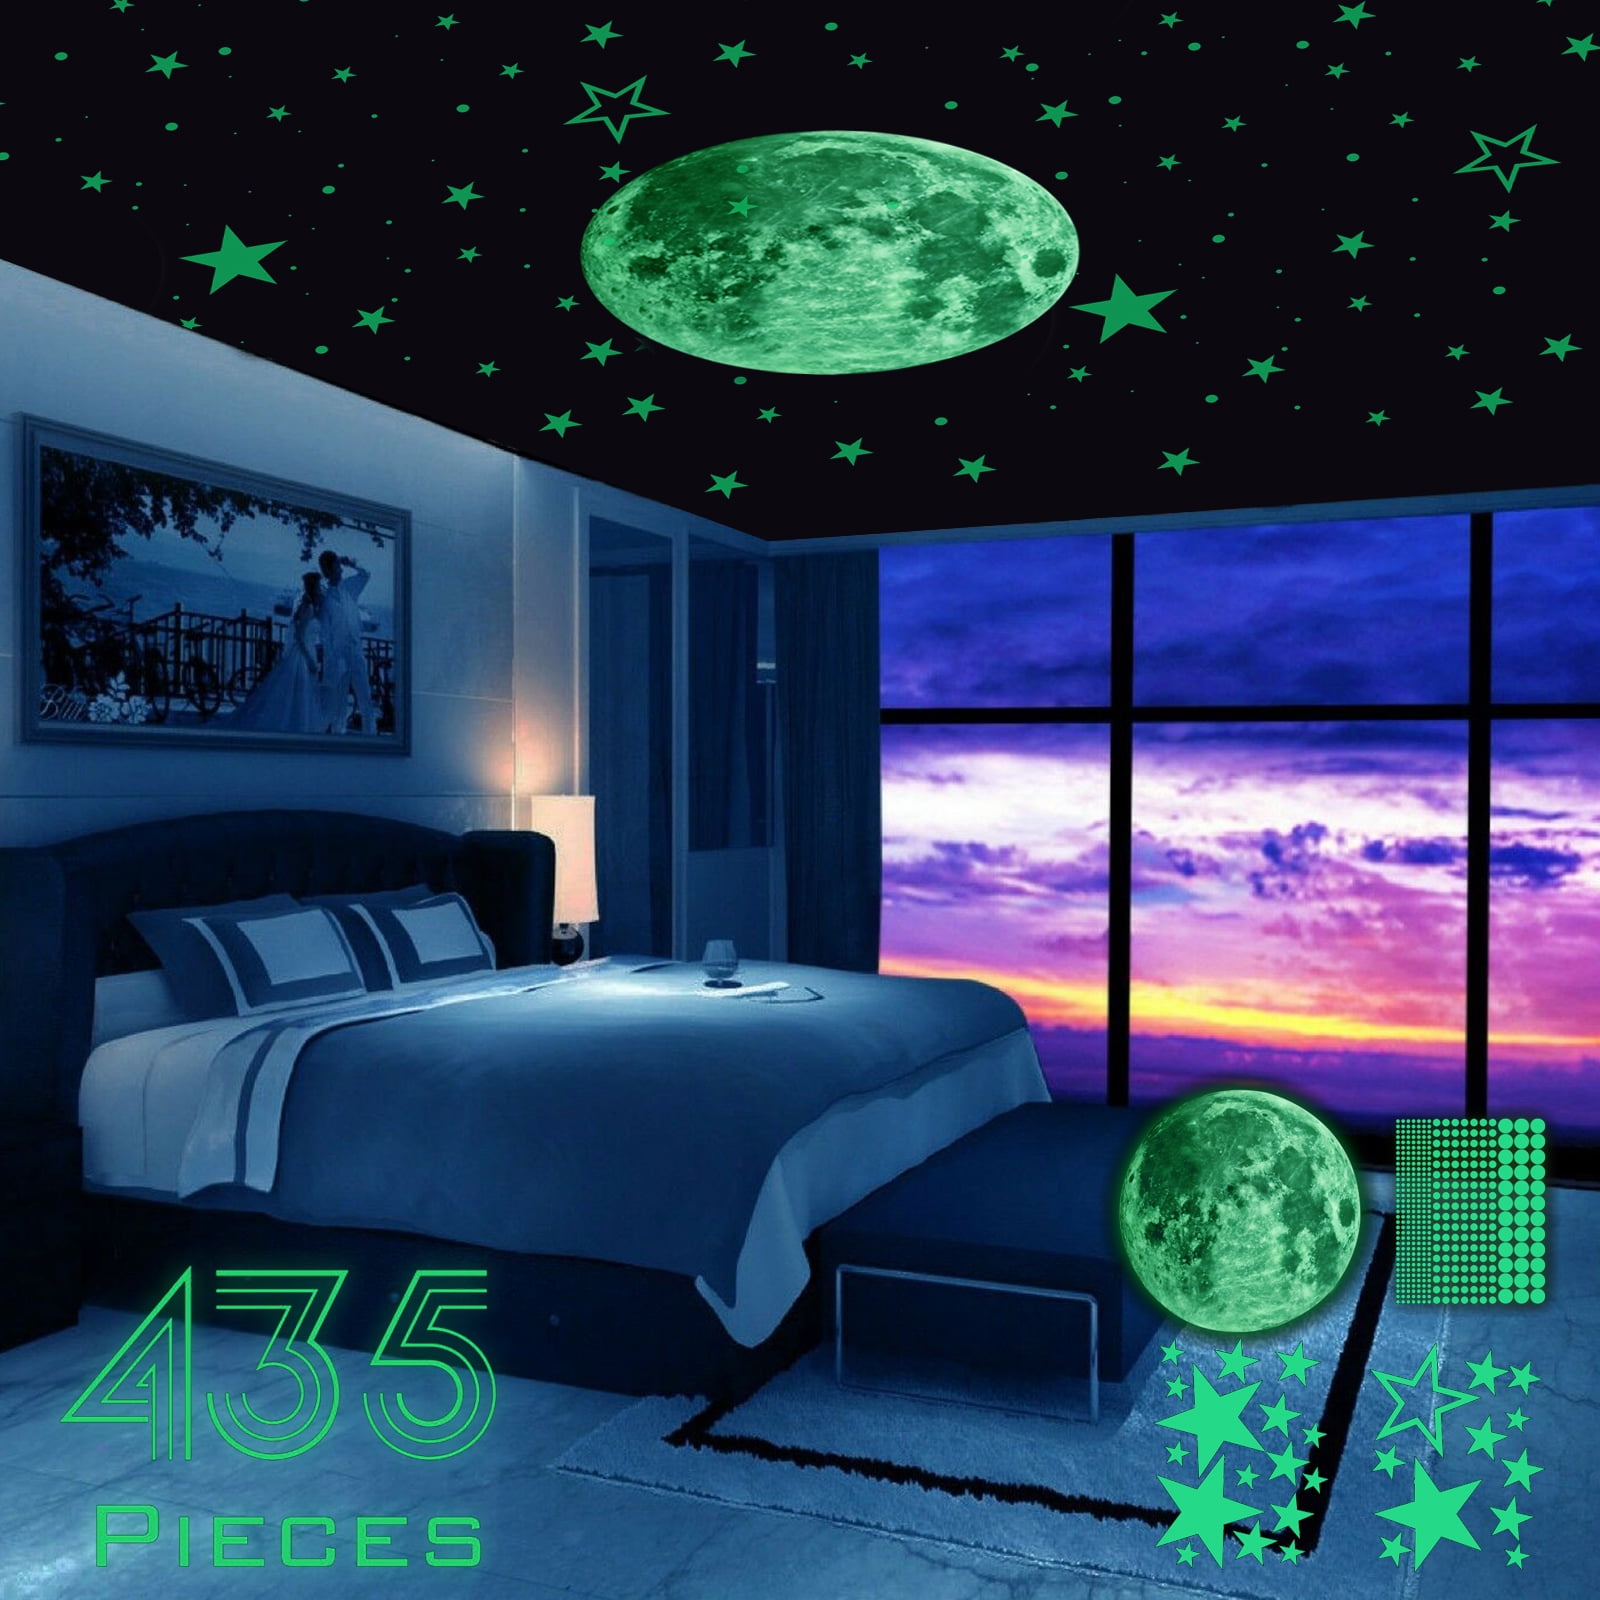 826 Pcs Glowing Wall Stickers 3D Stars Dots Stickers for Kids Bedroom Ceiling Wall Decoration Birthday Gifts Holiday Atmosphere